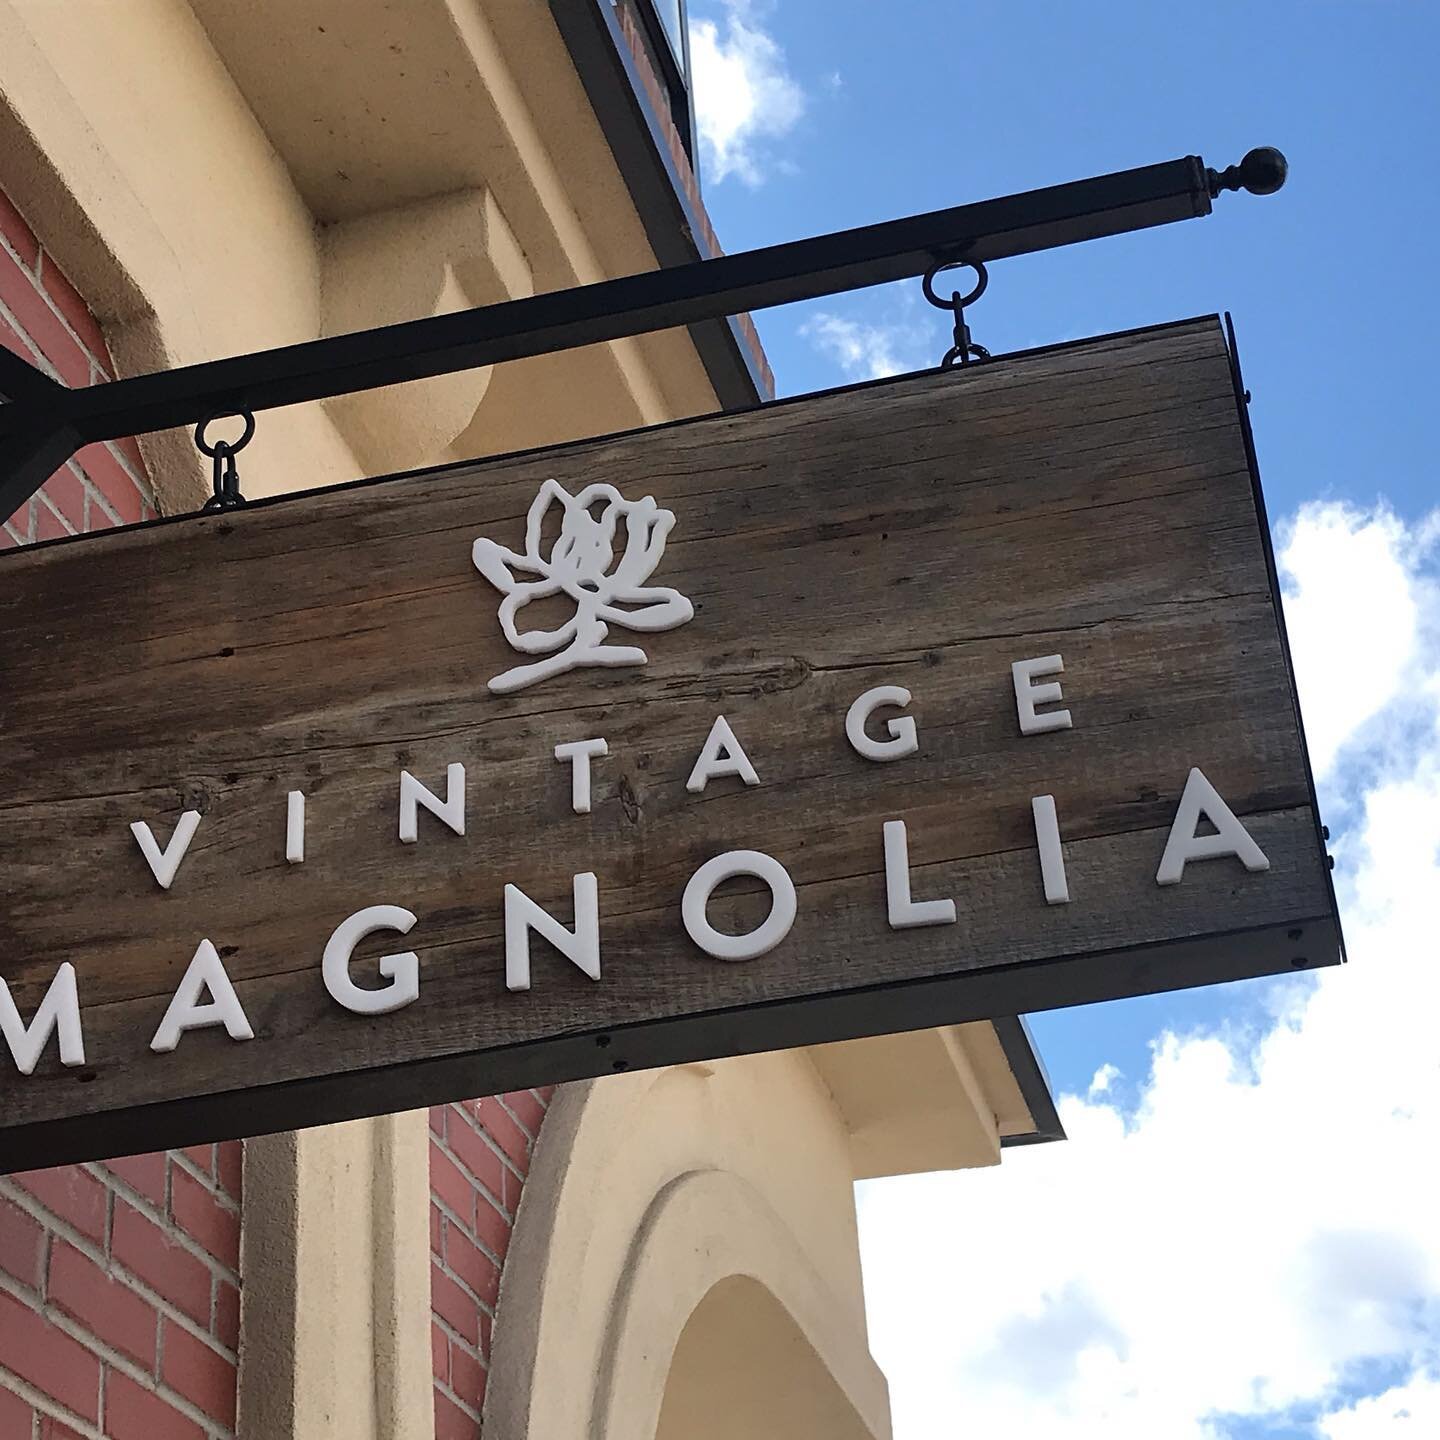 The rebrand of Vintage Magnolia continues with new blade signs and window graphics. Another great collaboration with 970 design.